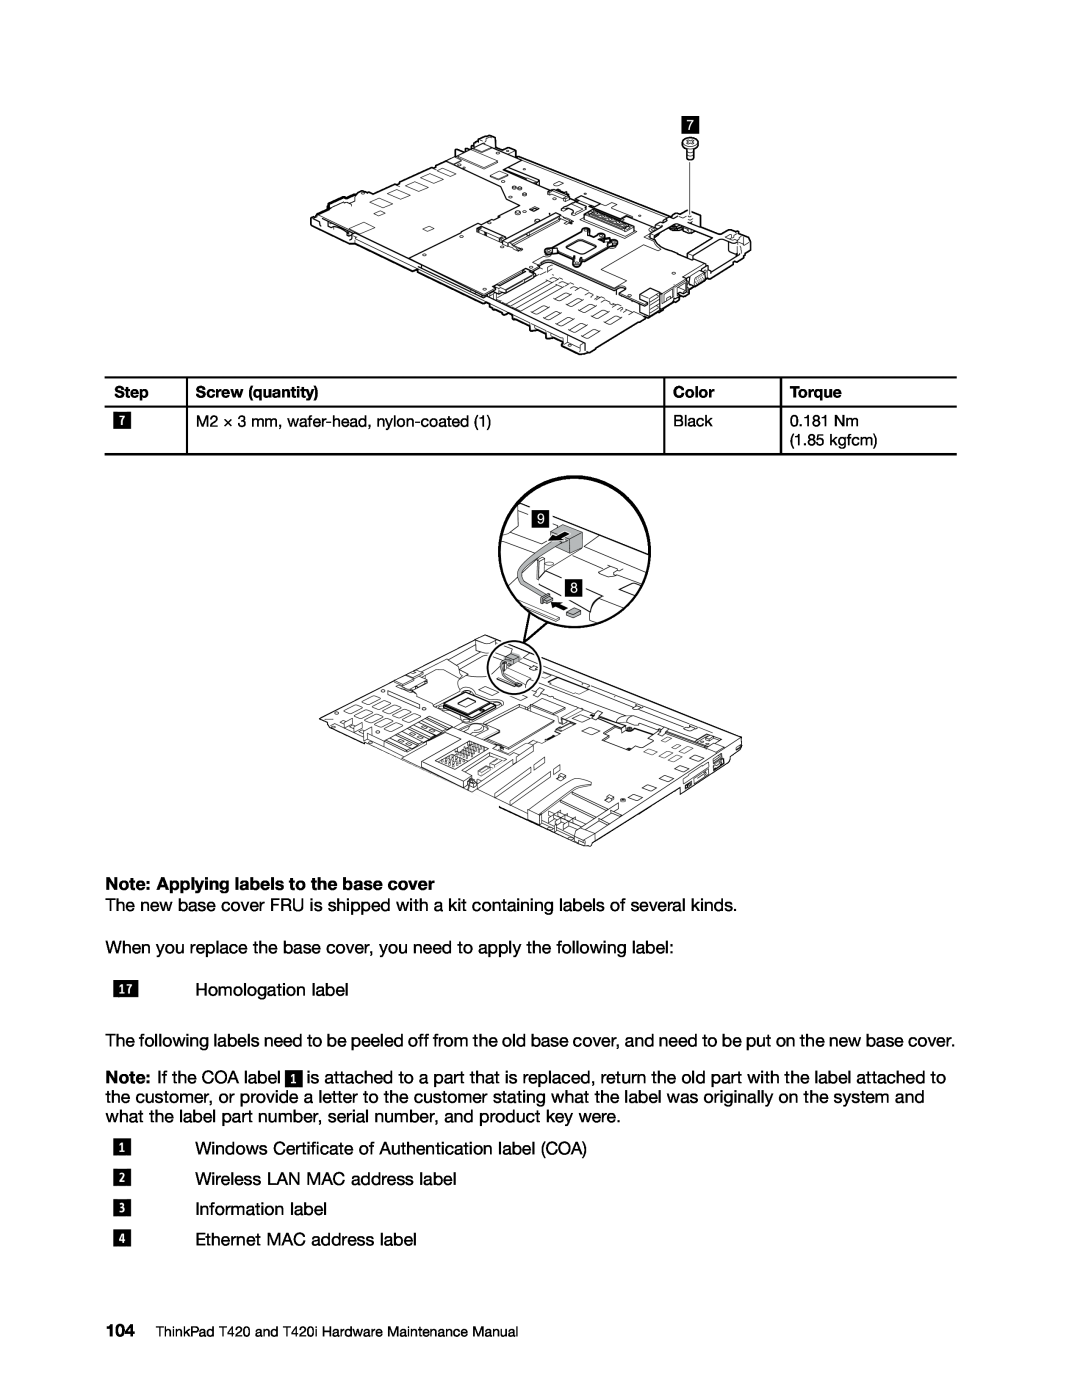 Lenovo T420i manual Note Applying labels to the base cover 